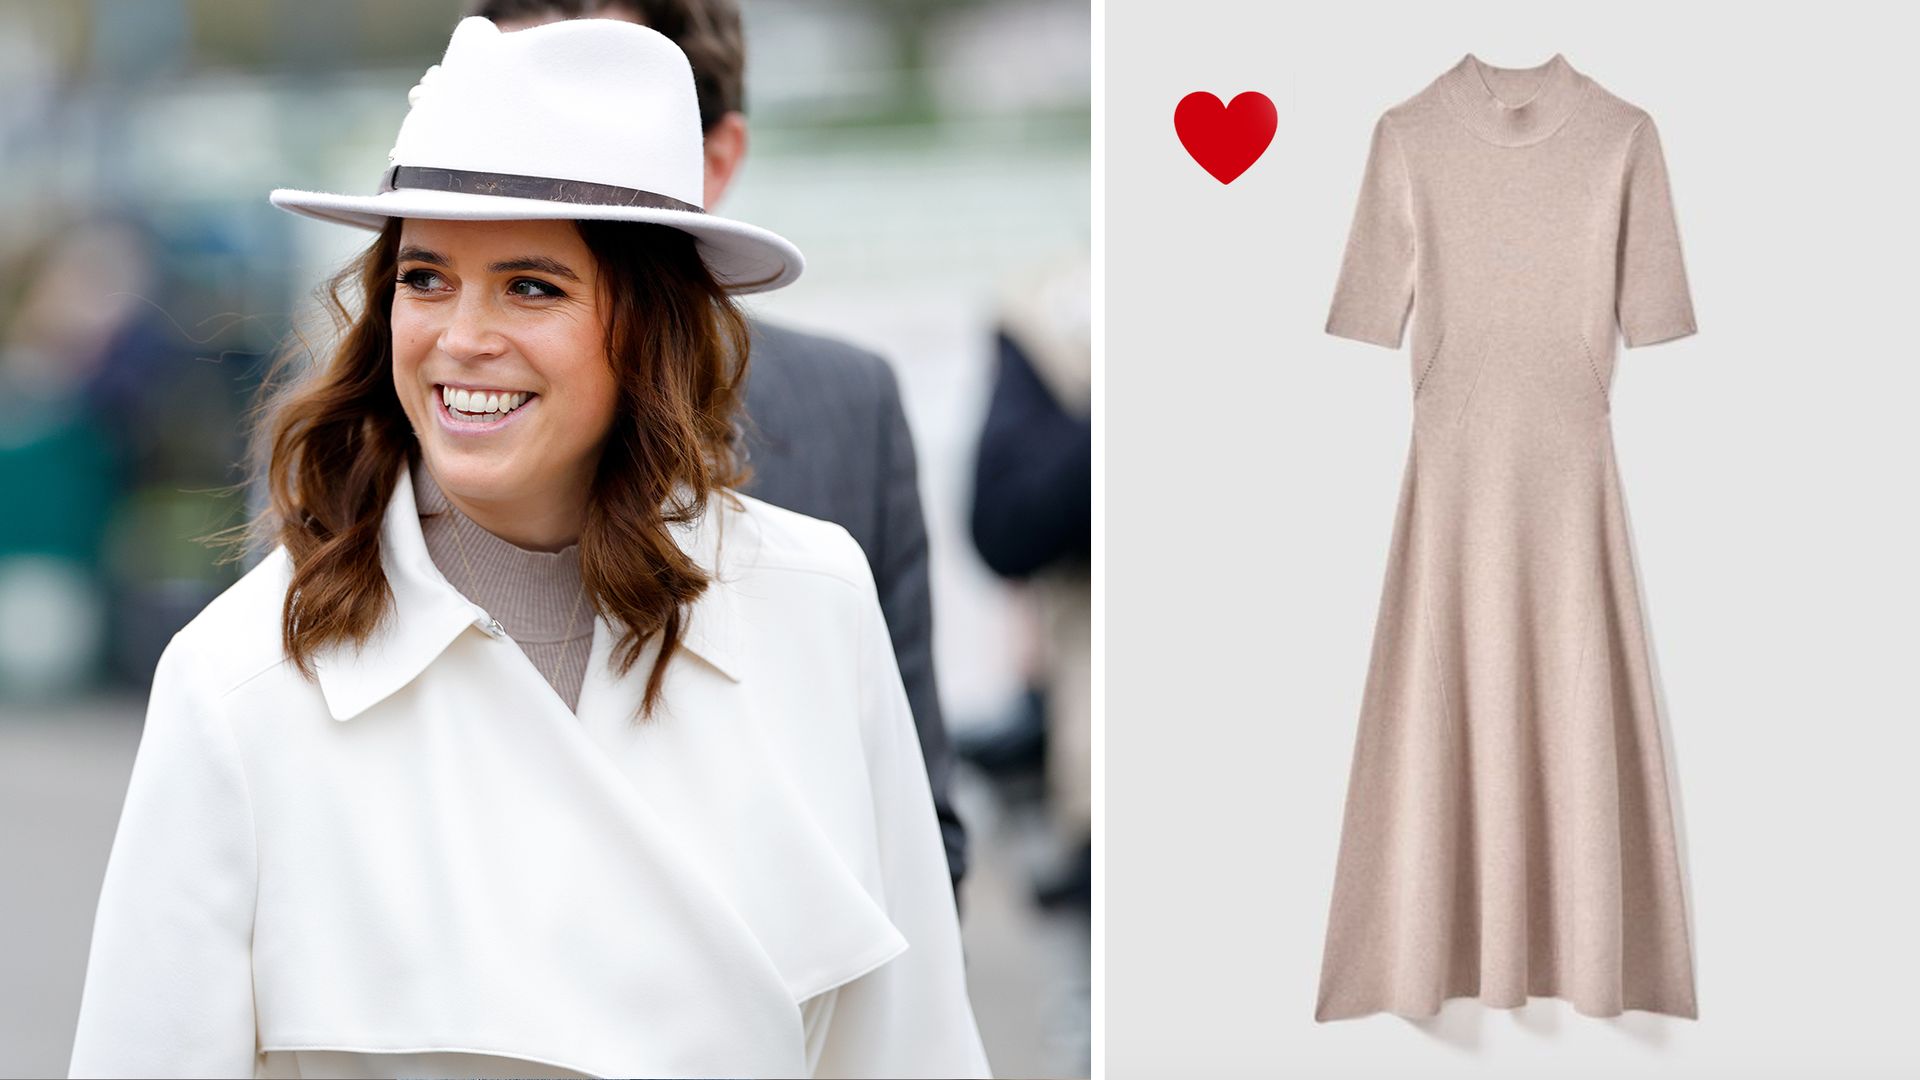 I’m a shopping editor and trust me, Princess Eugenie’s new Reiss outfit is going to sell out